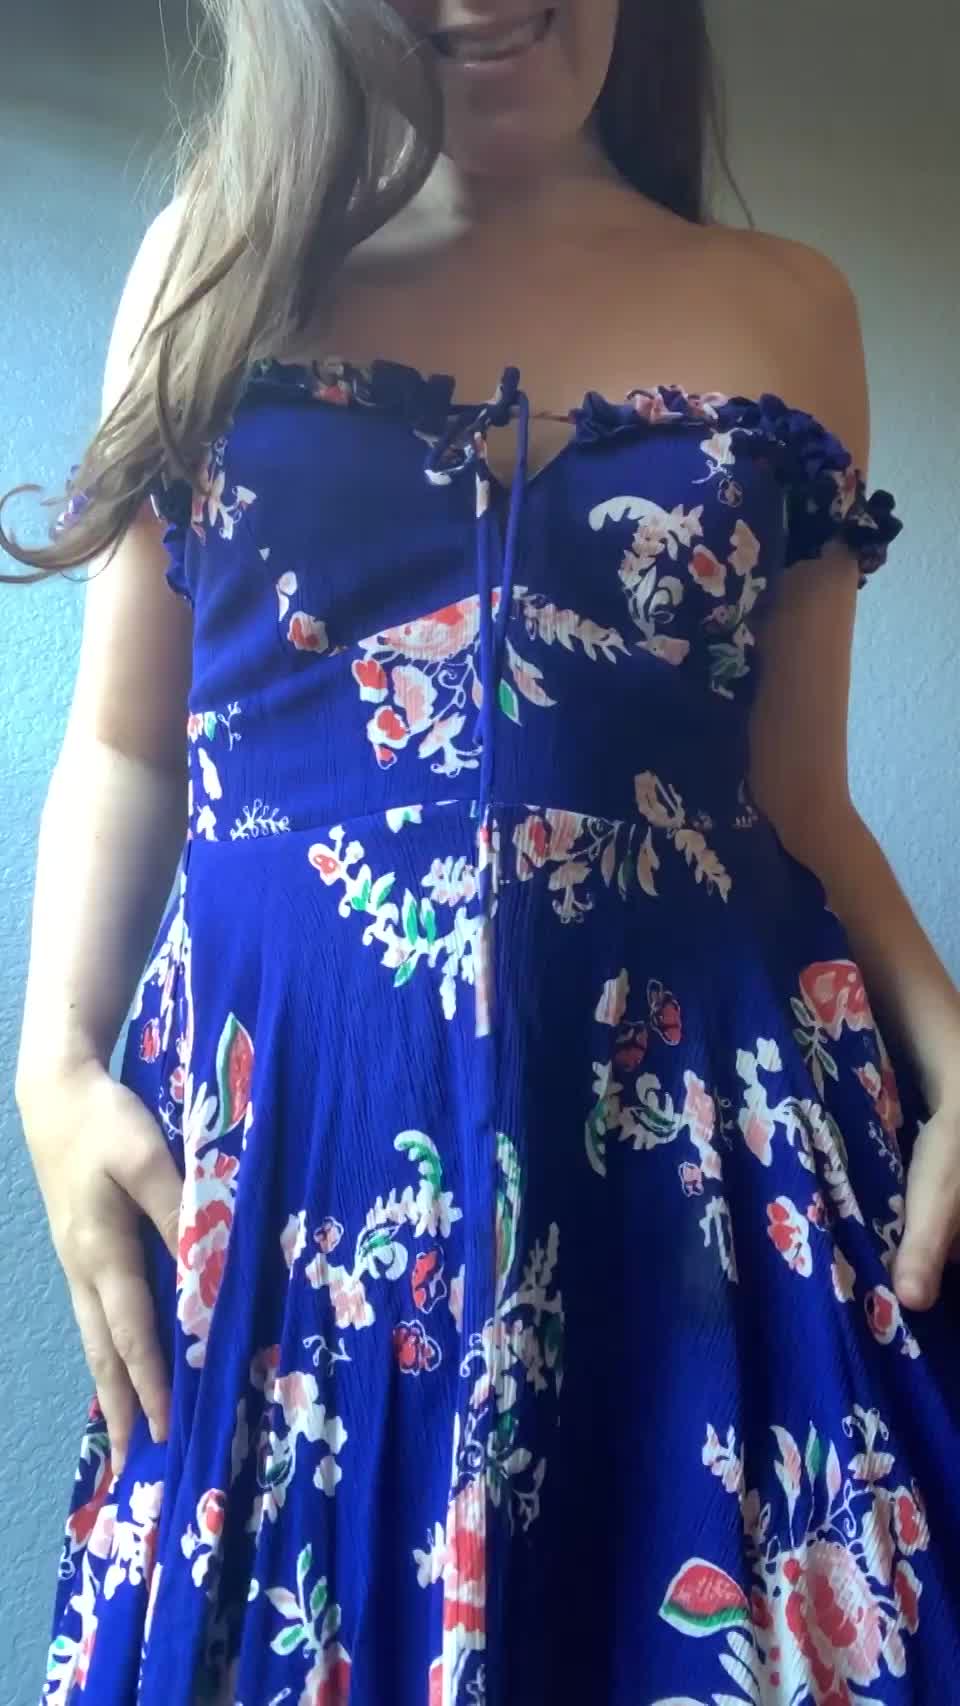 I think you’ll like the way I take off my sundress for you : video clip